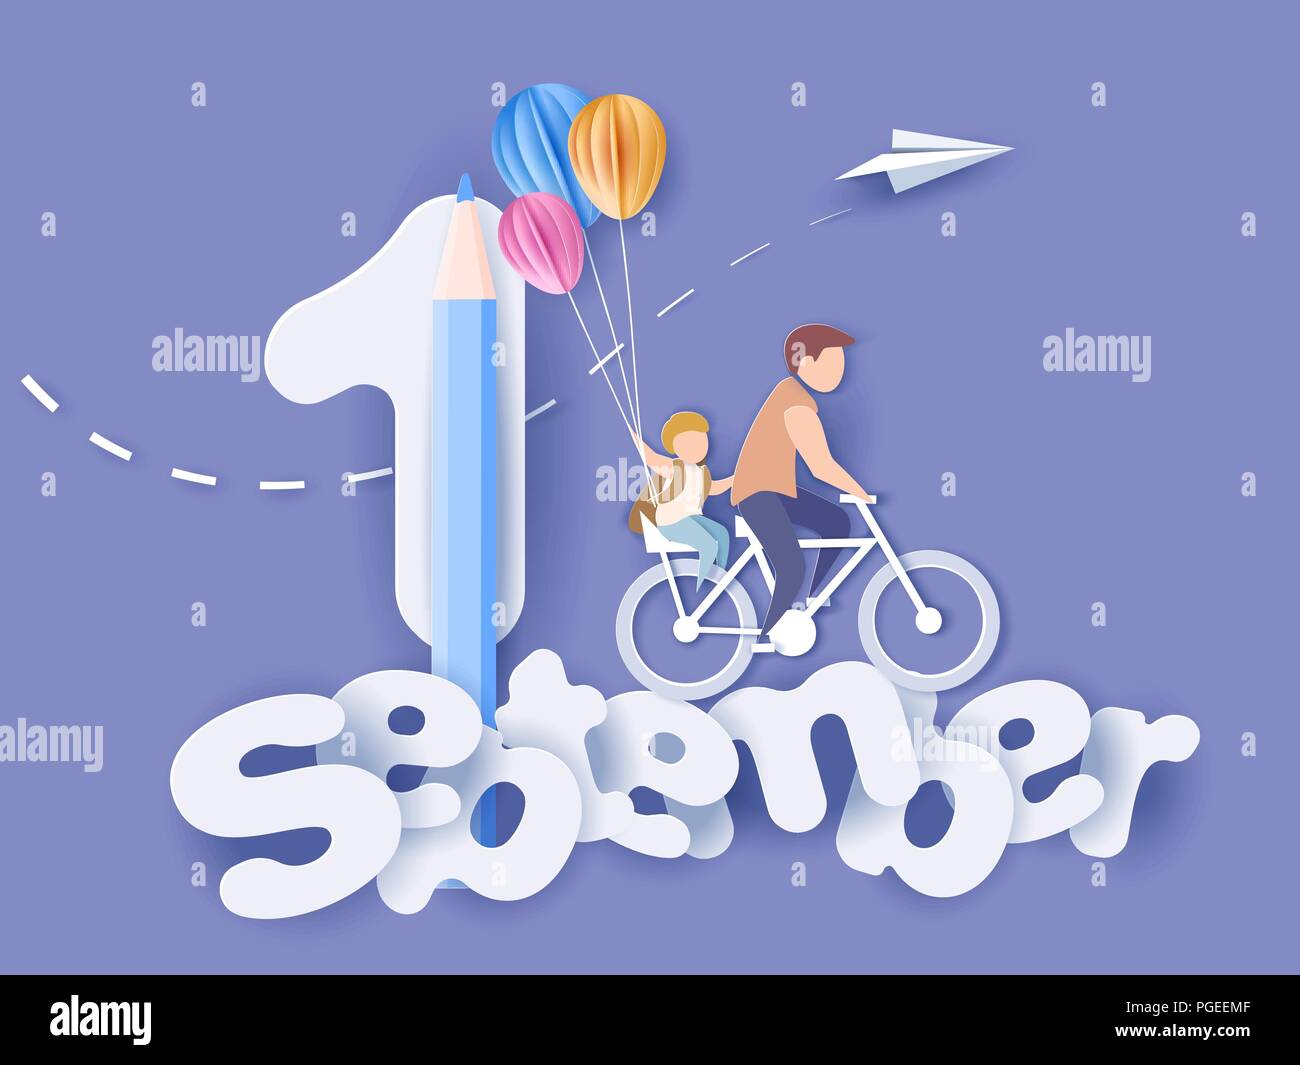 Back to school 1 september card. Children bicycling with air balloons. Paper cut style. Vector illustration Stock Vector